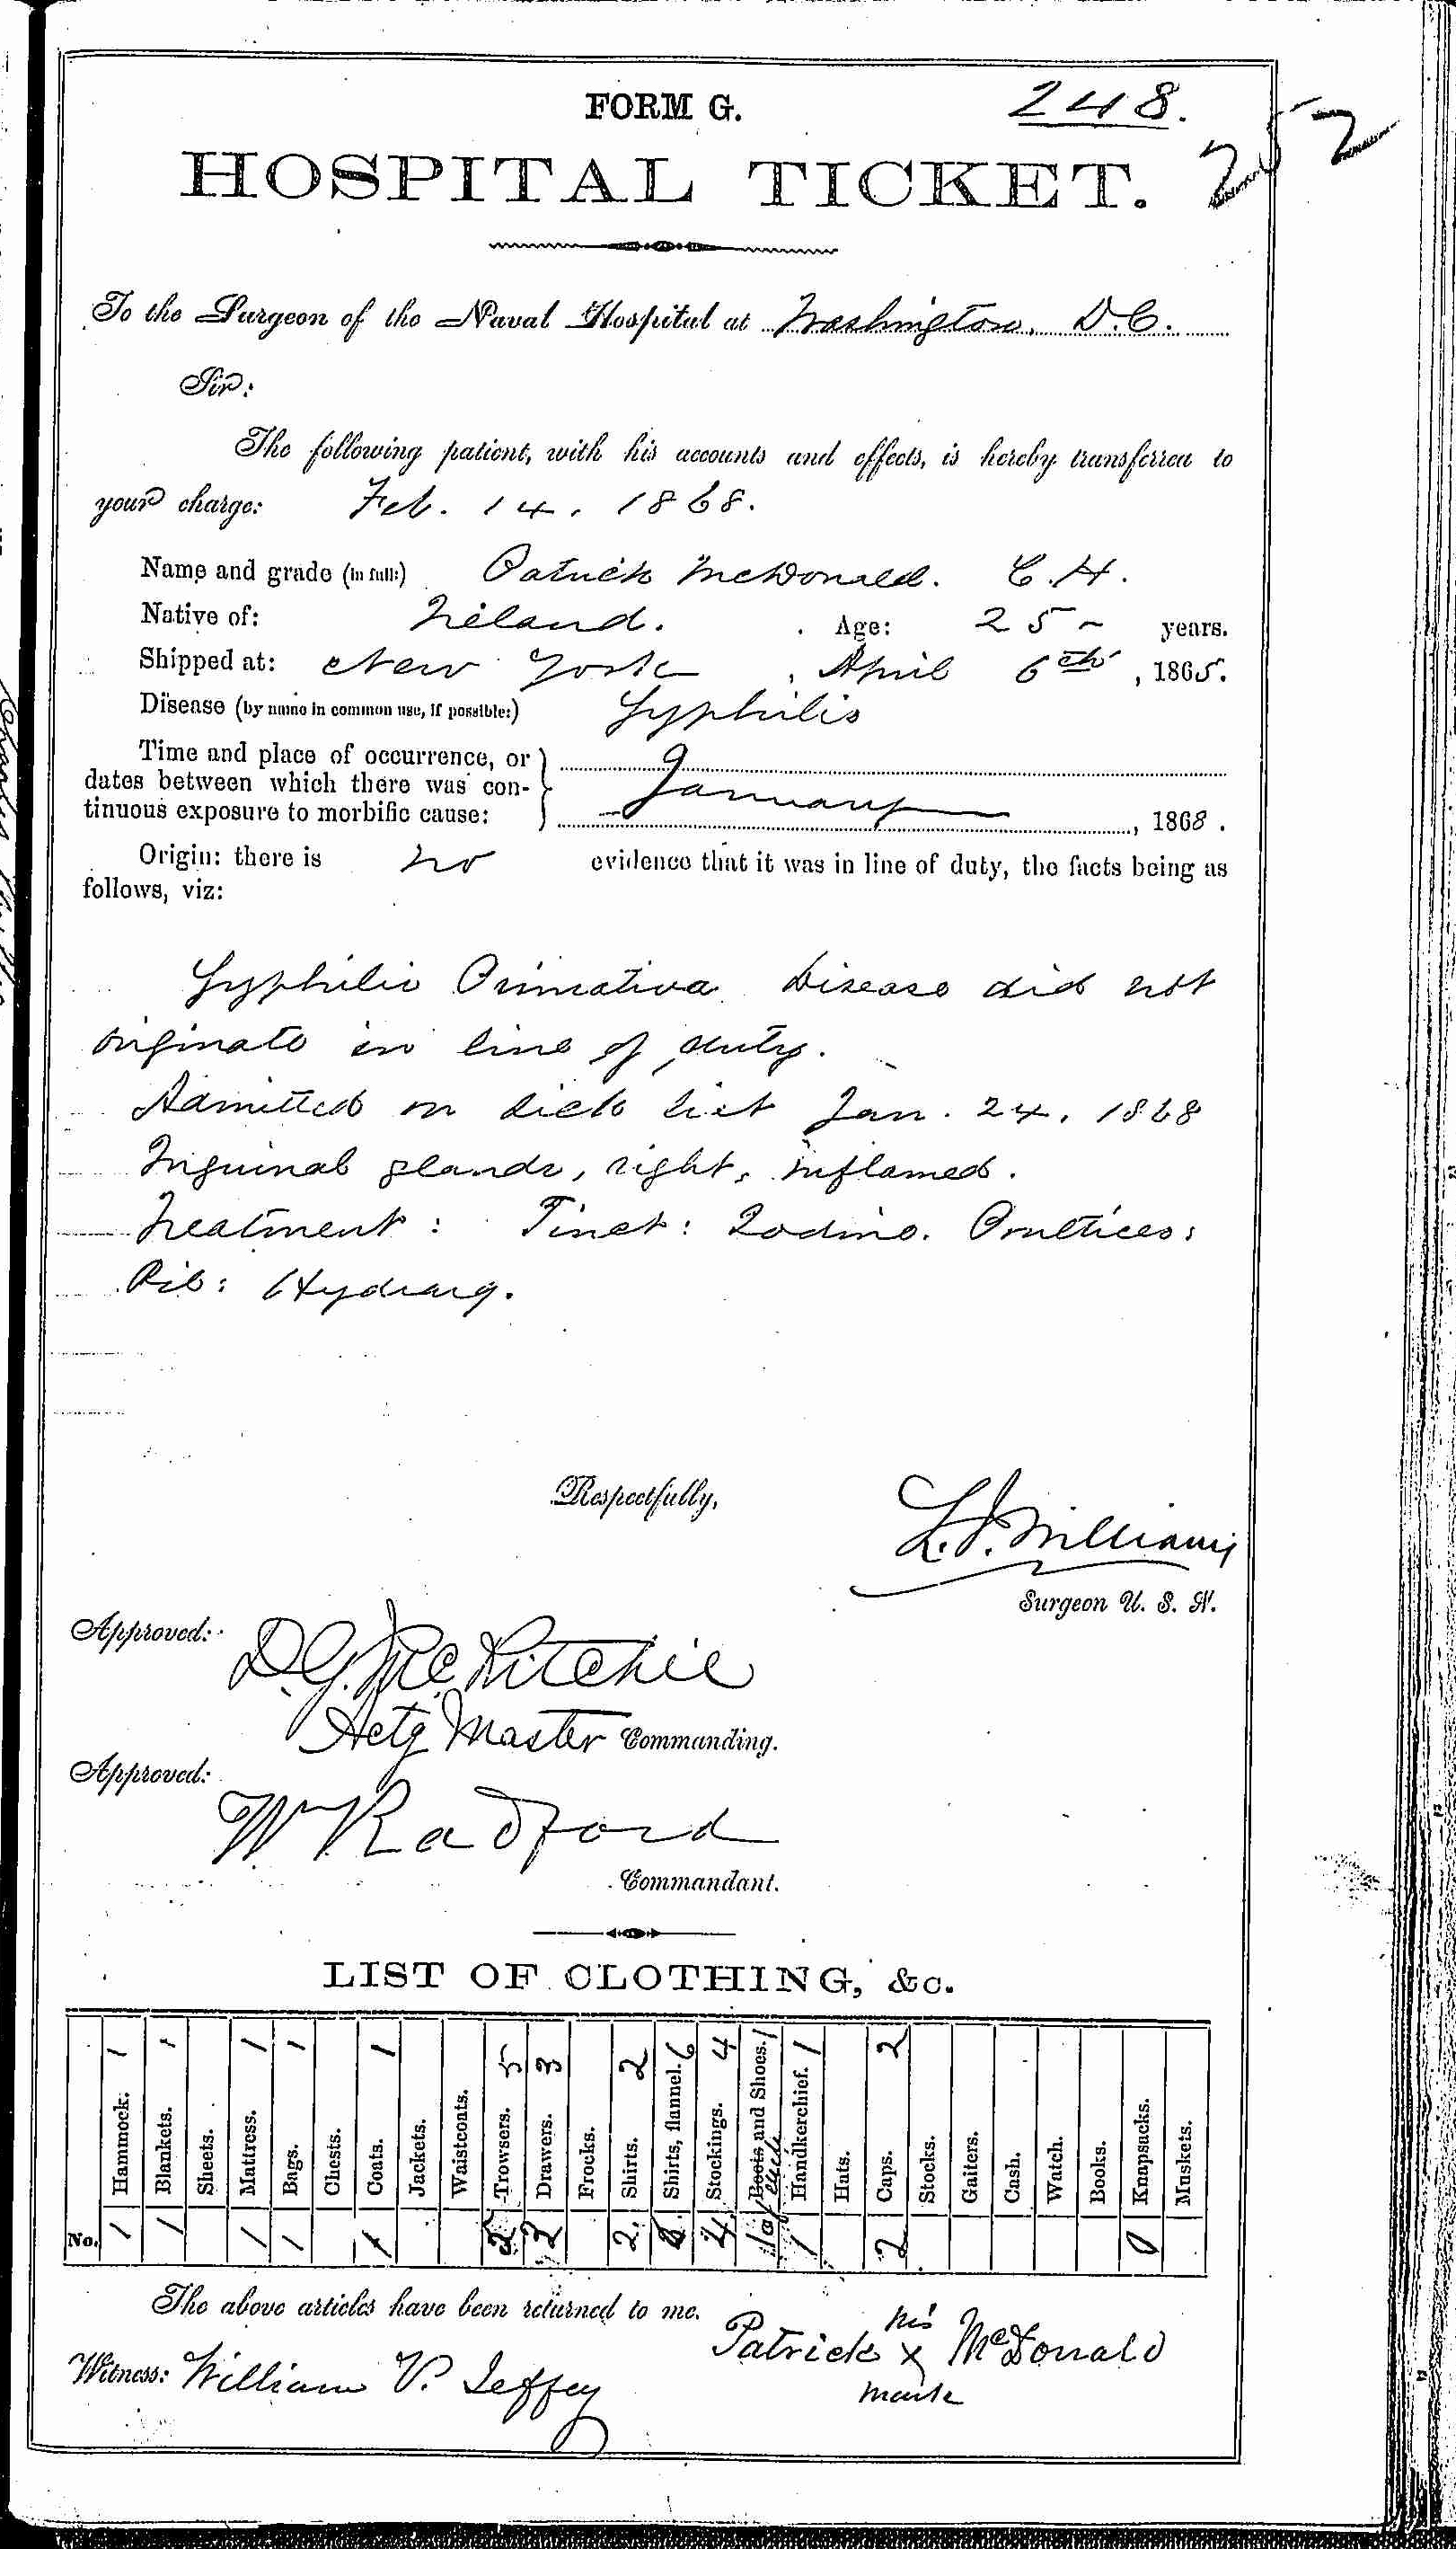 Entry for Patrick McDonald (page 1 of 2) in the log Hospital Tickets and Case Papers - Naval Hospital - Washington, D.C. - 1866-68